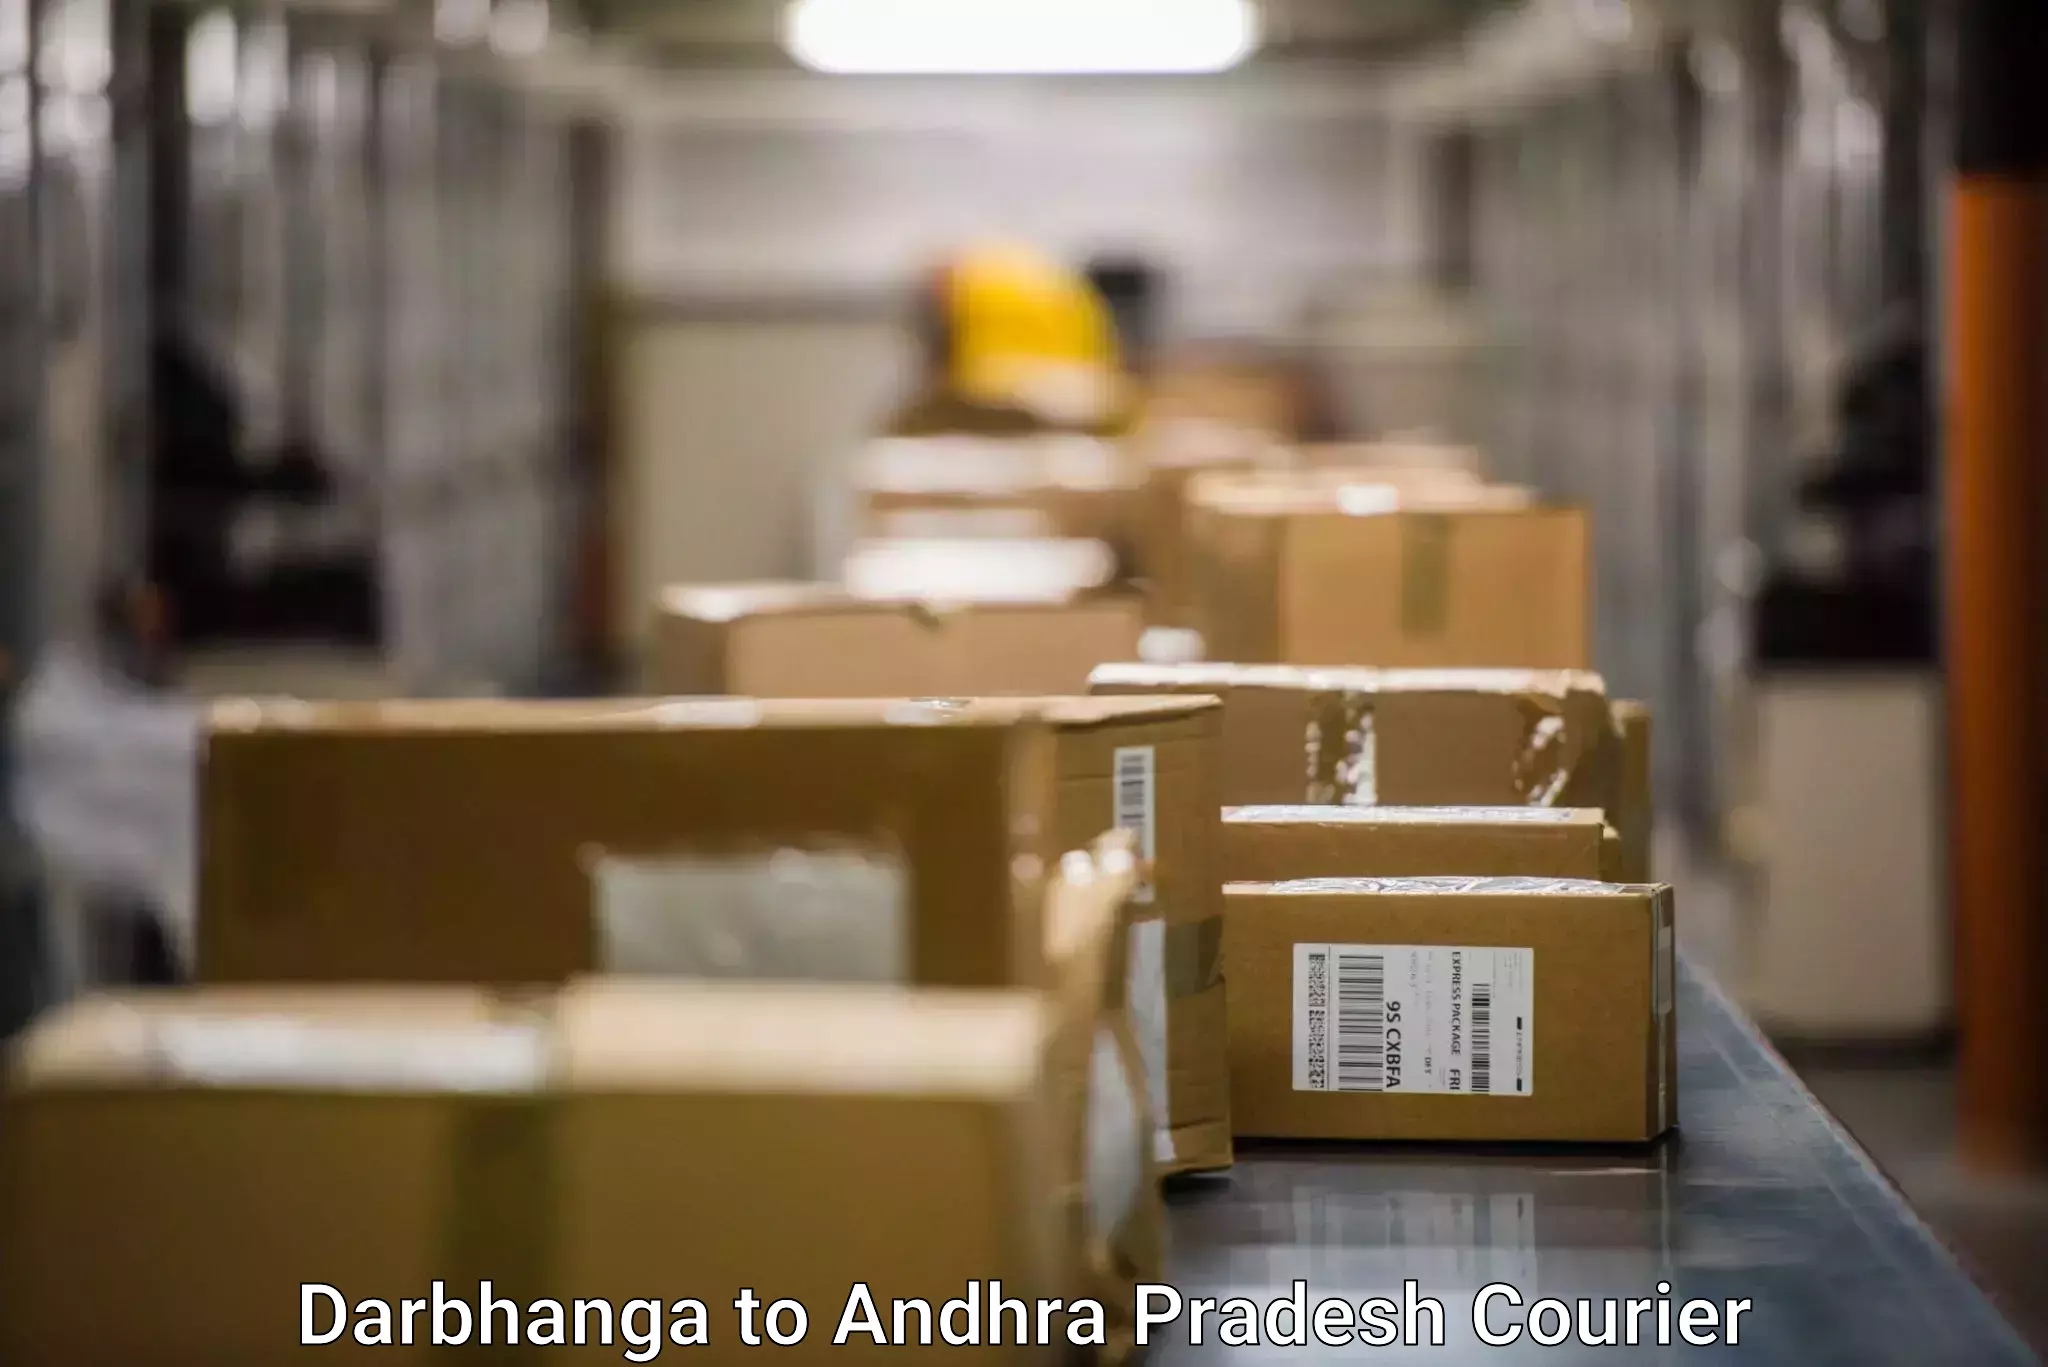 Courier service innovation in Darbhanga to Andhra Pradesh